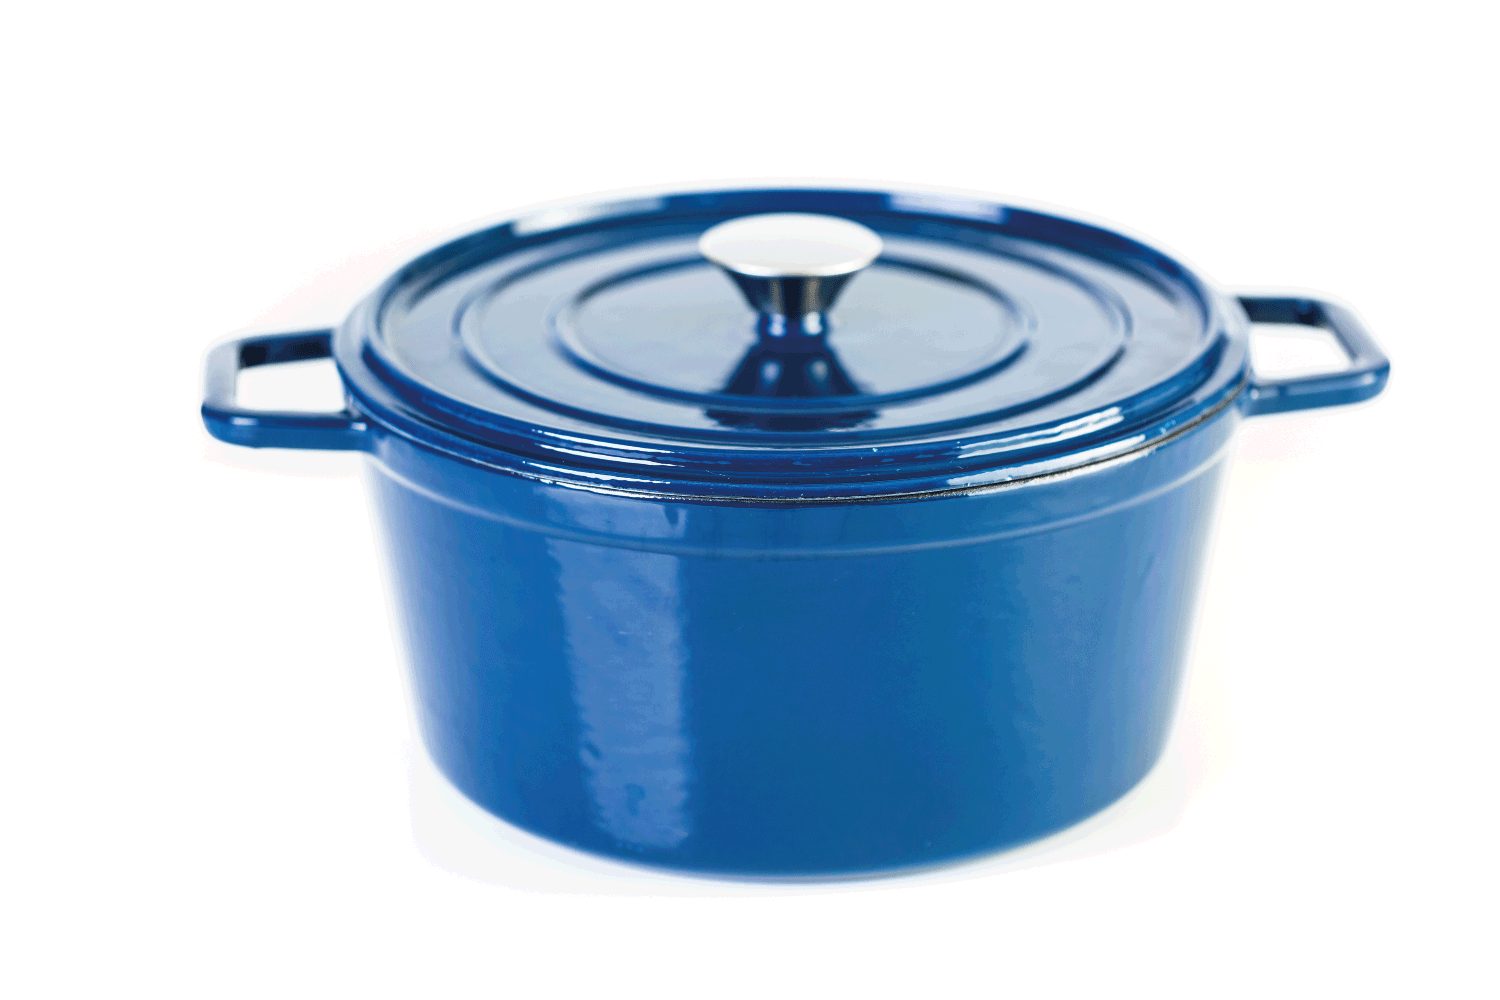 Blue enameled cast iron covered dutch oven on a white background.